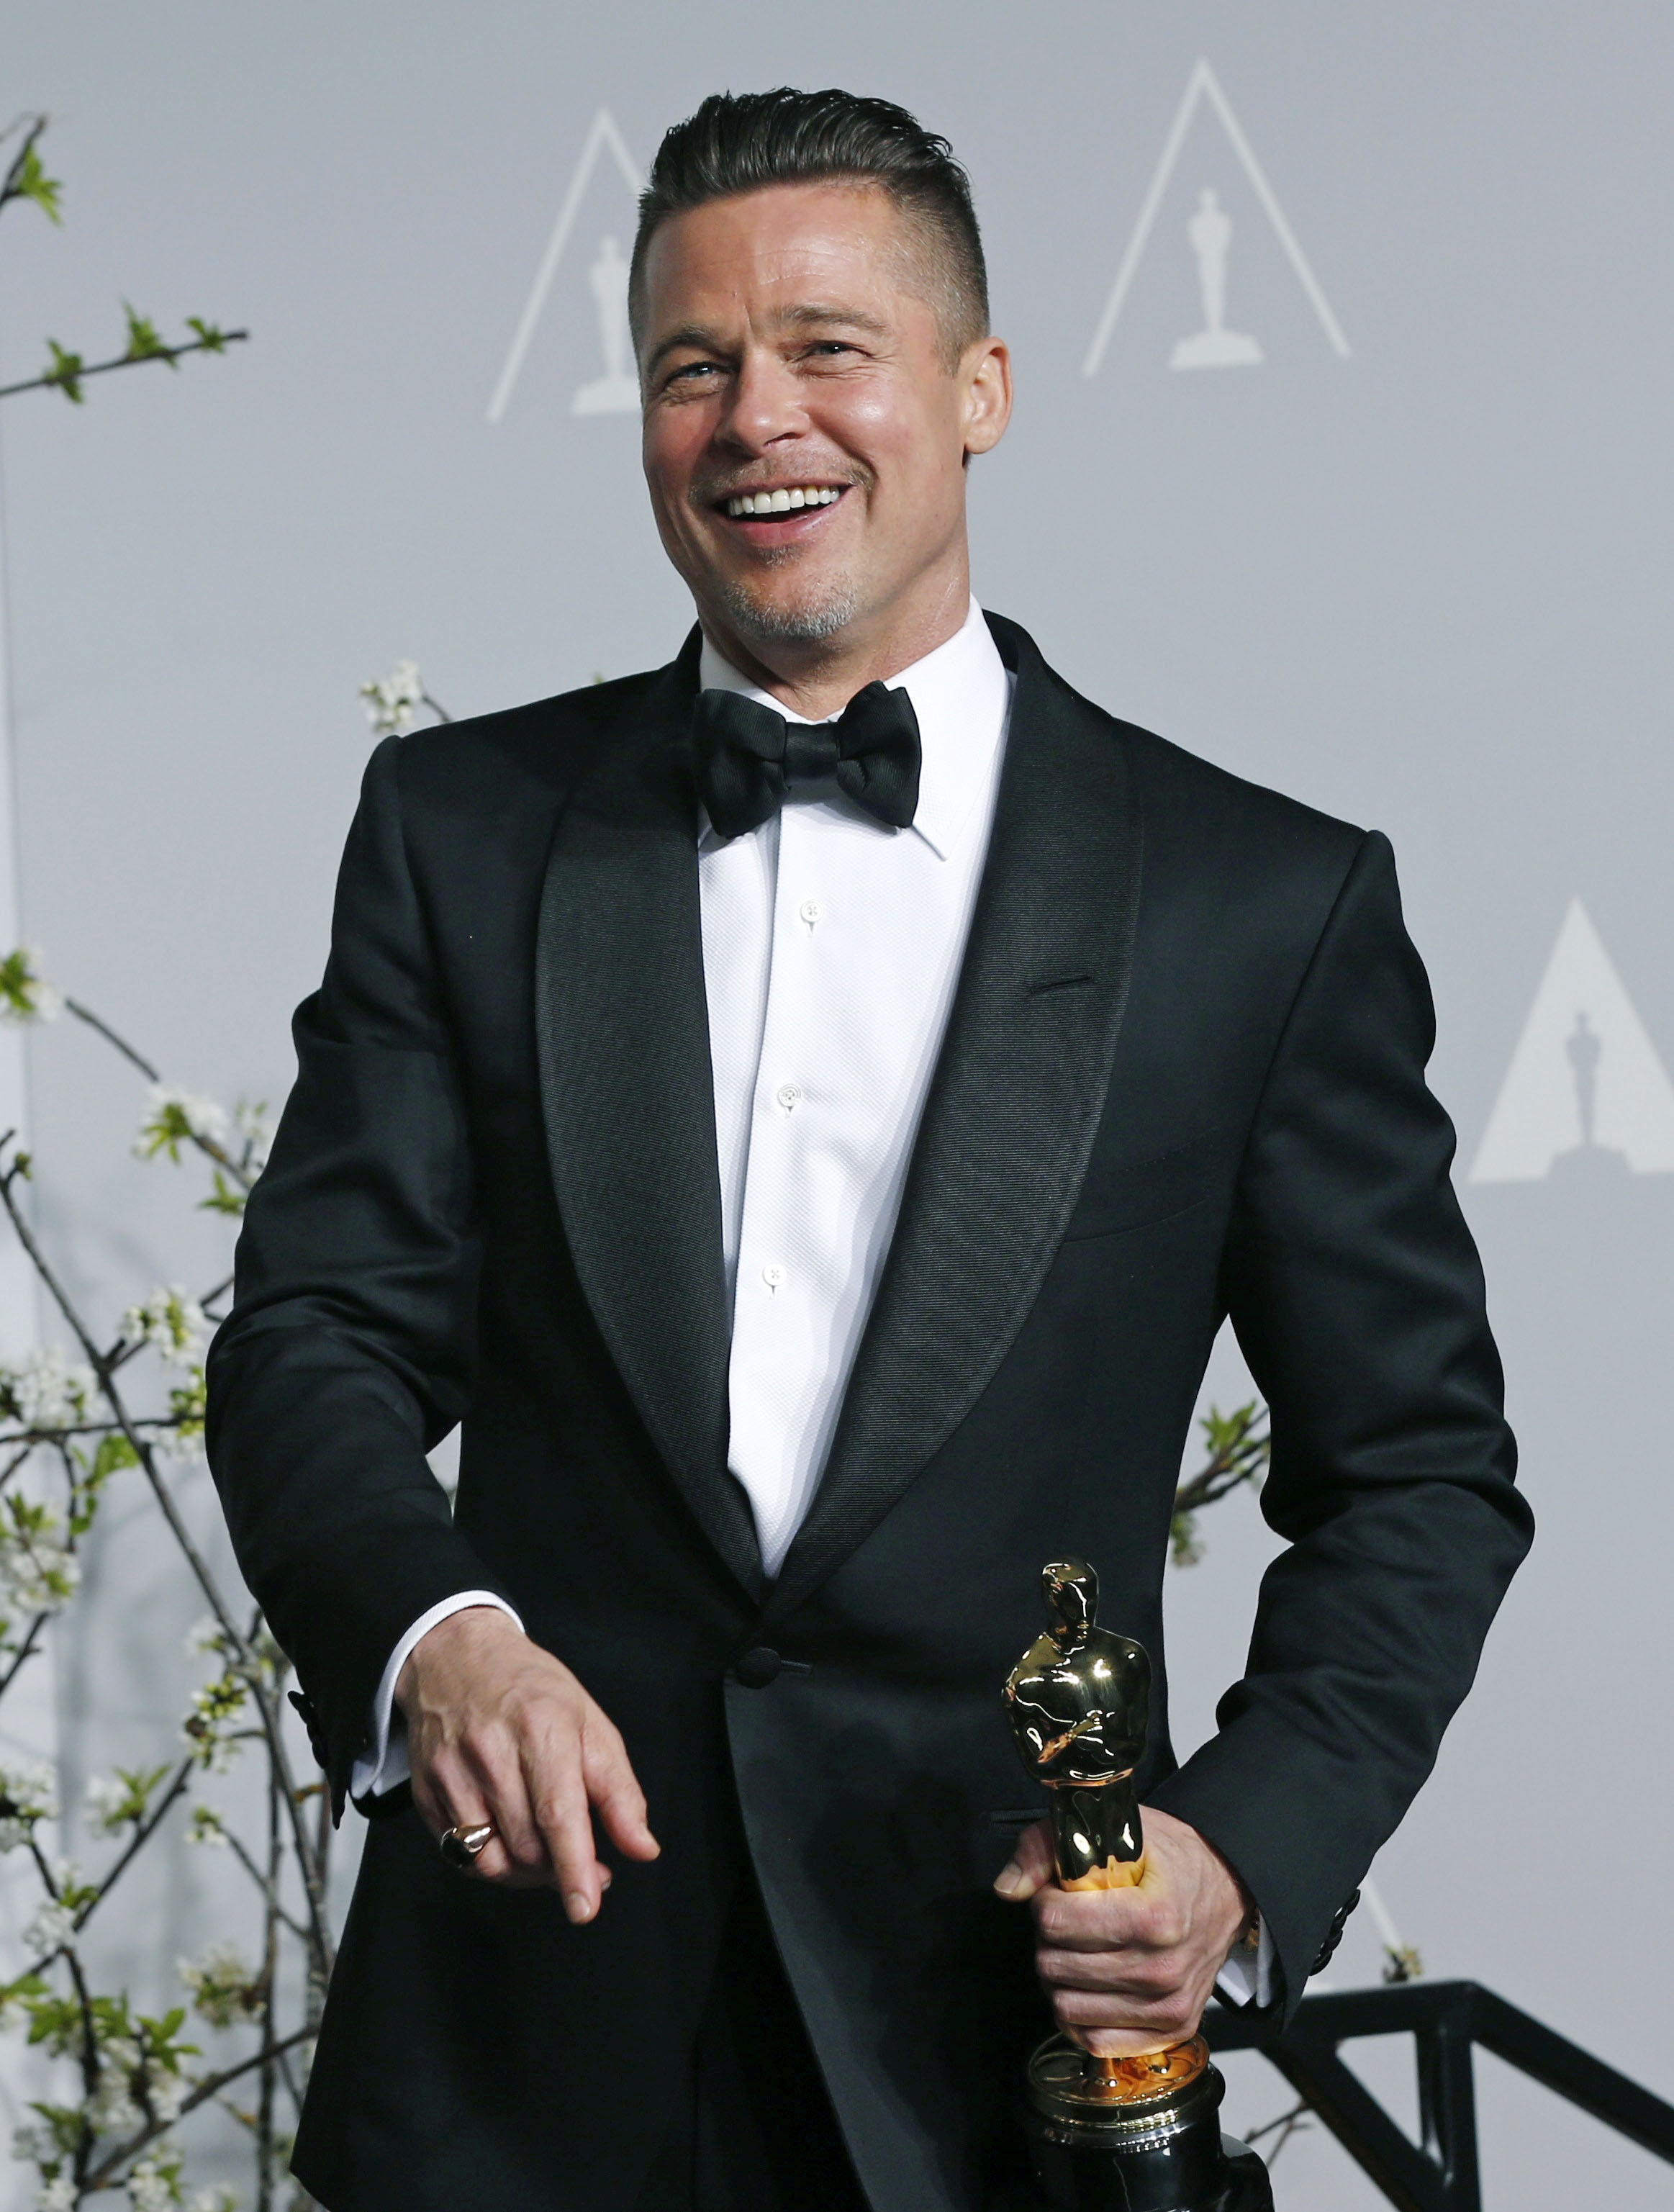 Brad Pitt at the 86th Academy Awards in Hollywood on March 2, 2014 after winning best picture for "12 Years a Slave".